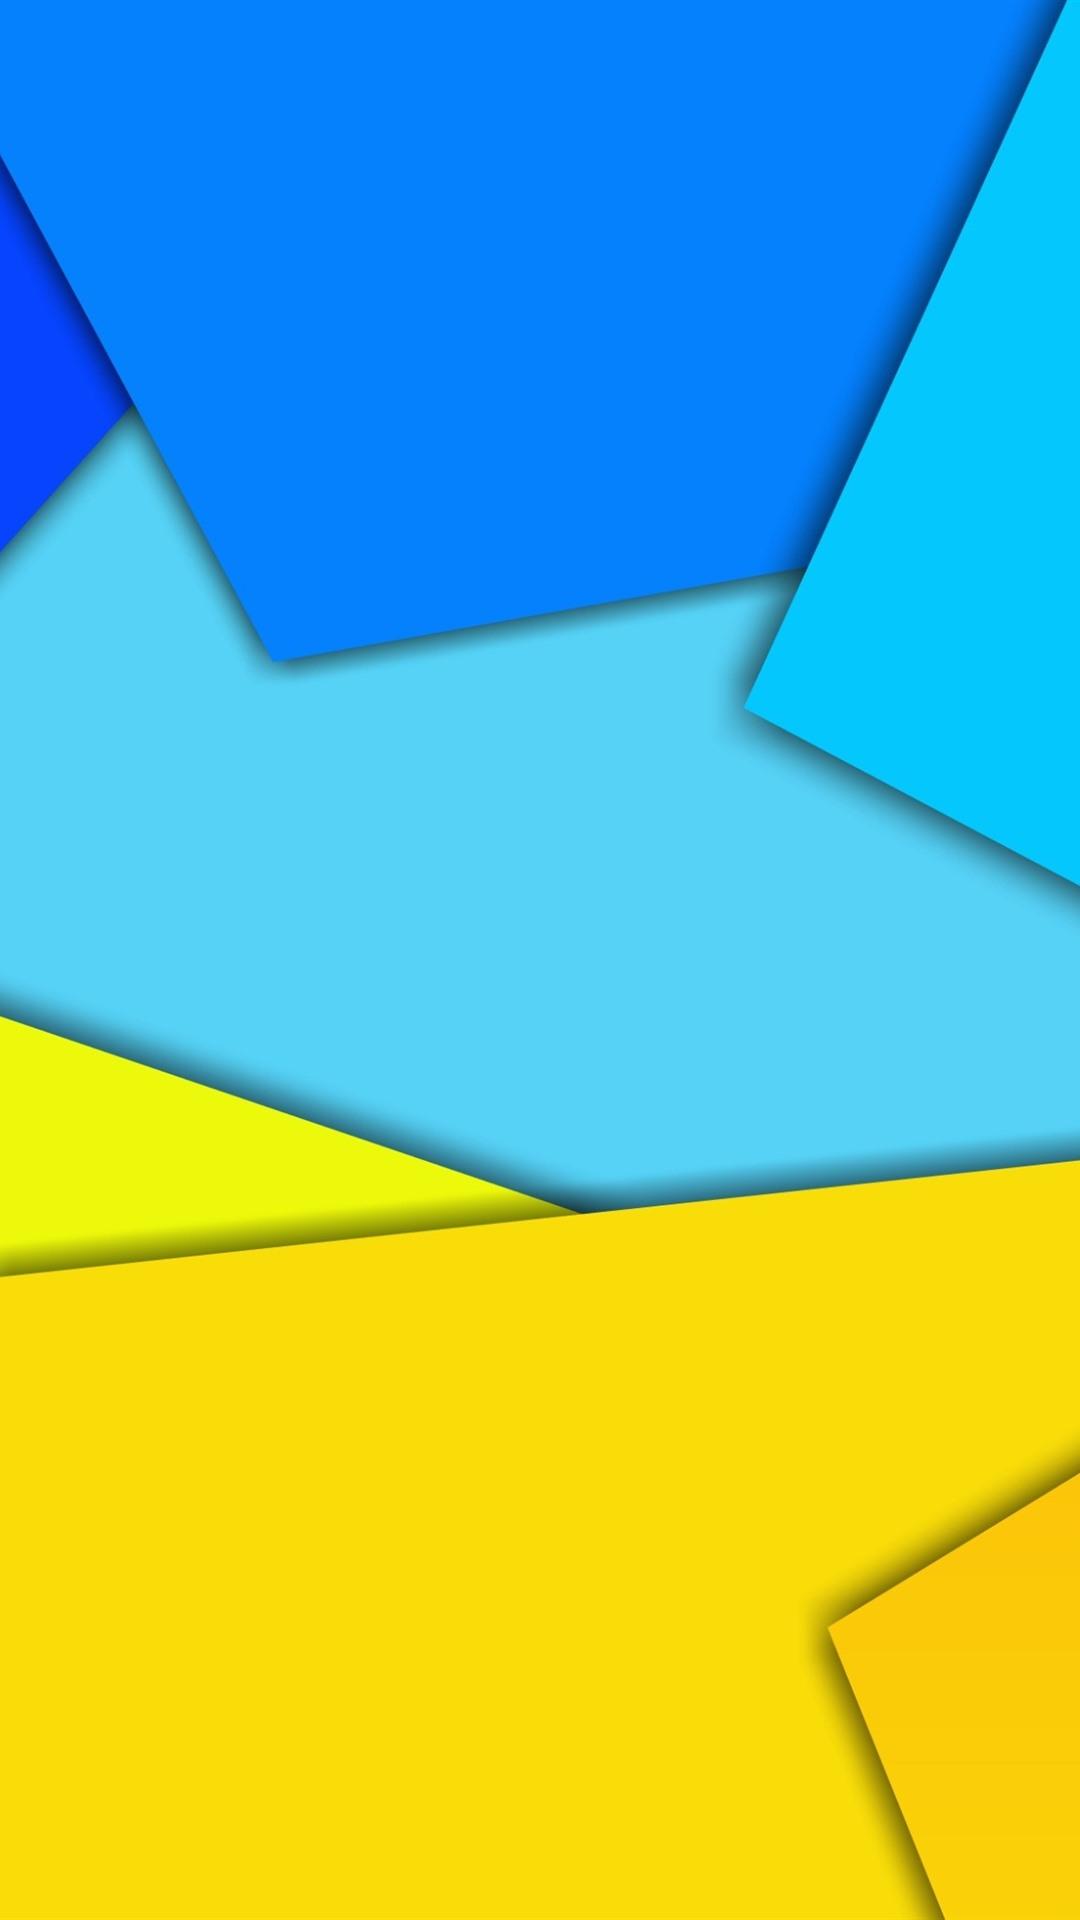 Yellow and blue geometric figure, abstract picture 1080x1920